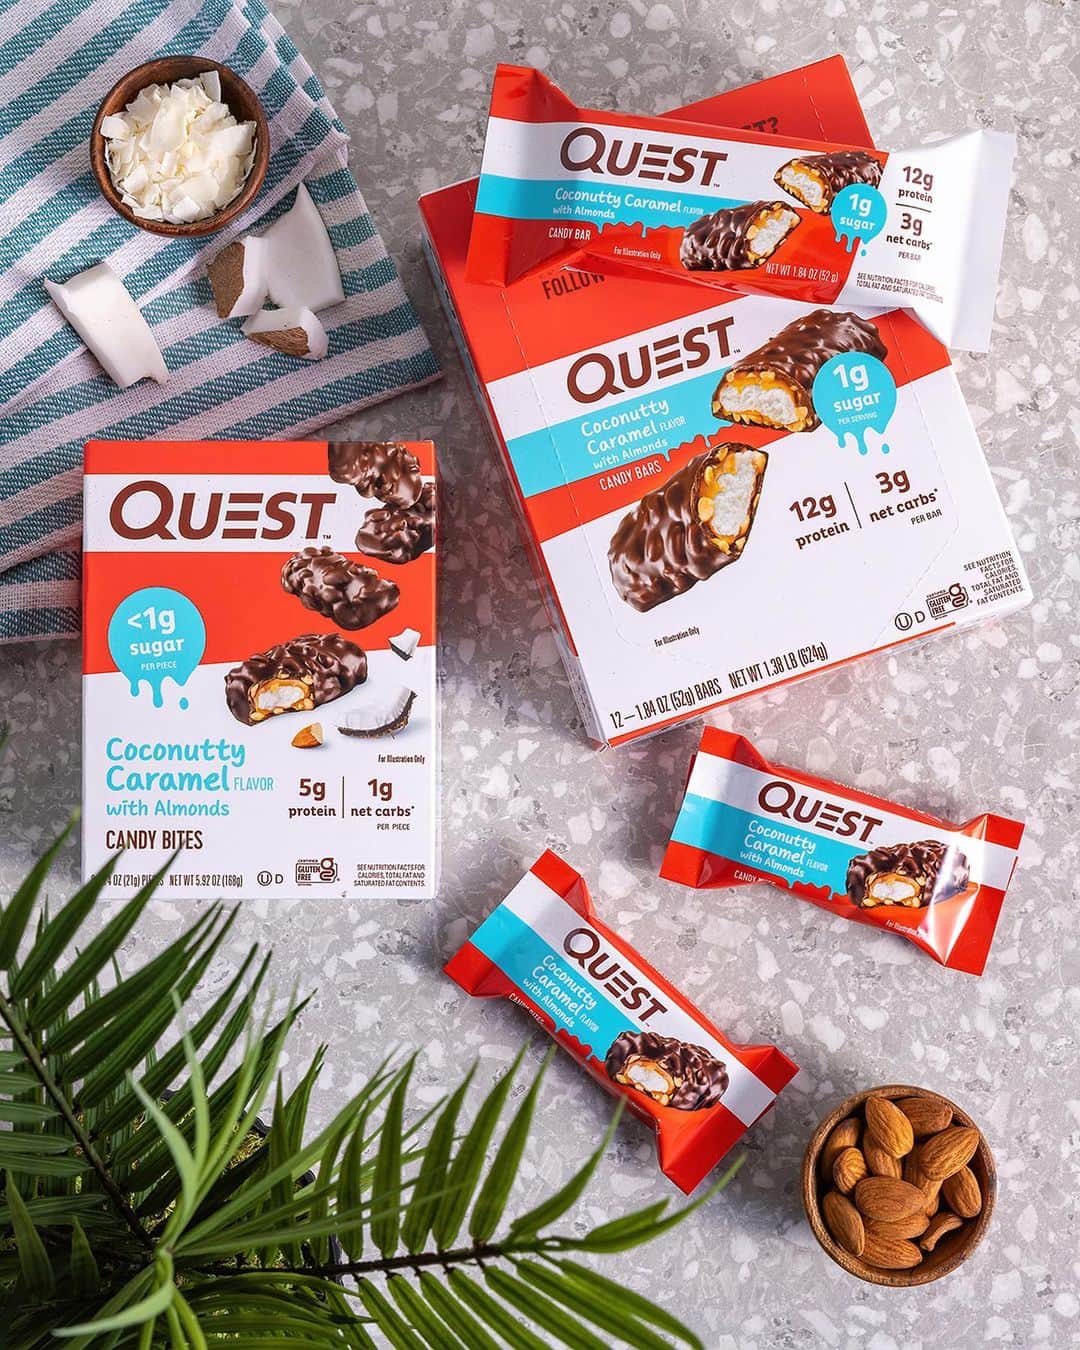 questnutritionのインスタグラム：「DOUBLE TAP to welcome the Coconutty Candy Bites & Candy Bar! 🥥😋🍫 Enjoy chucks of real coconut, caramel, & almonds covered in a chocolatey coating for a sweet & satisfying candy experience. 😍 • Candy Bites: <1g sugar, 5g protein, & 1g net carb per bite. Available online & in stores at @Amazon, QuestNutrition.com, @Target,  Walmart (online only), @HyVee (Midwest), @Wegmans (Northeast, Mid-Atlantic), & your local health/nutrition stores nationwide. * Candy Bars: 1g sugar, 12g protein, & 3g net carbs per bar. Available online & in stores at @Amazon, QuestNutrition.com, @HyVee, @meijerstores (Midwest), @VitaminShoppe, & your local health/nutrition stores nationwide. #OnaQuest #QuestNutrition」